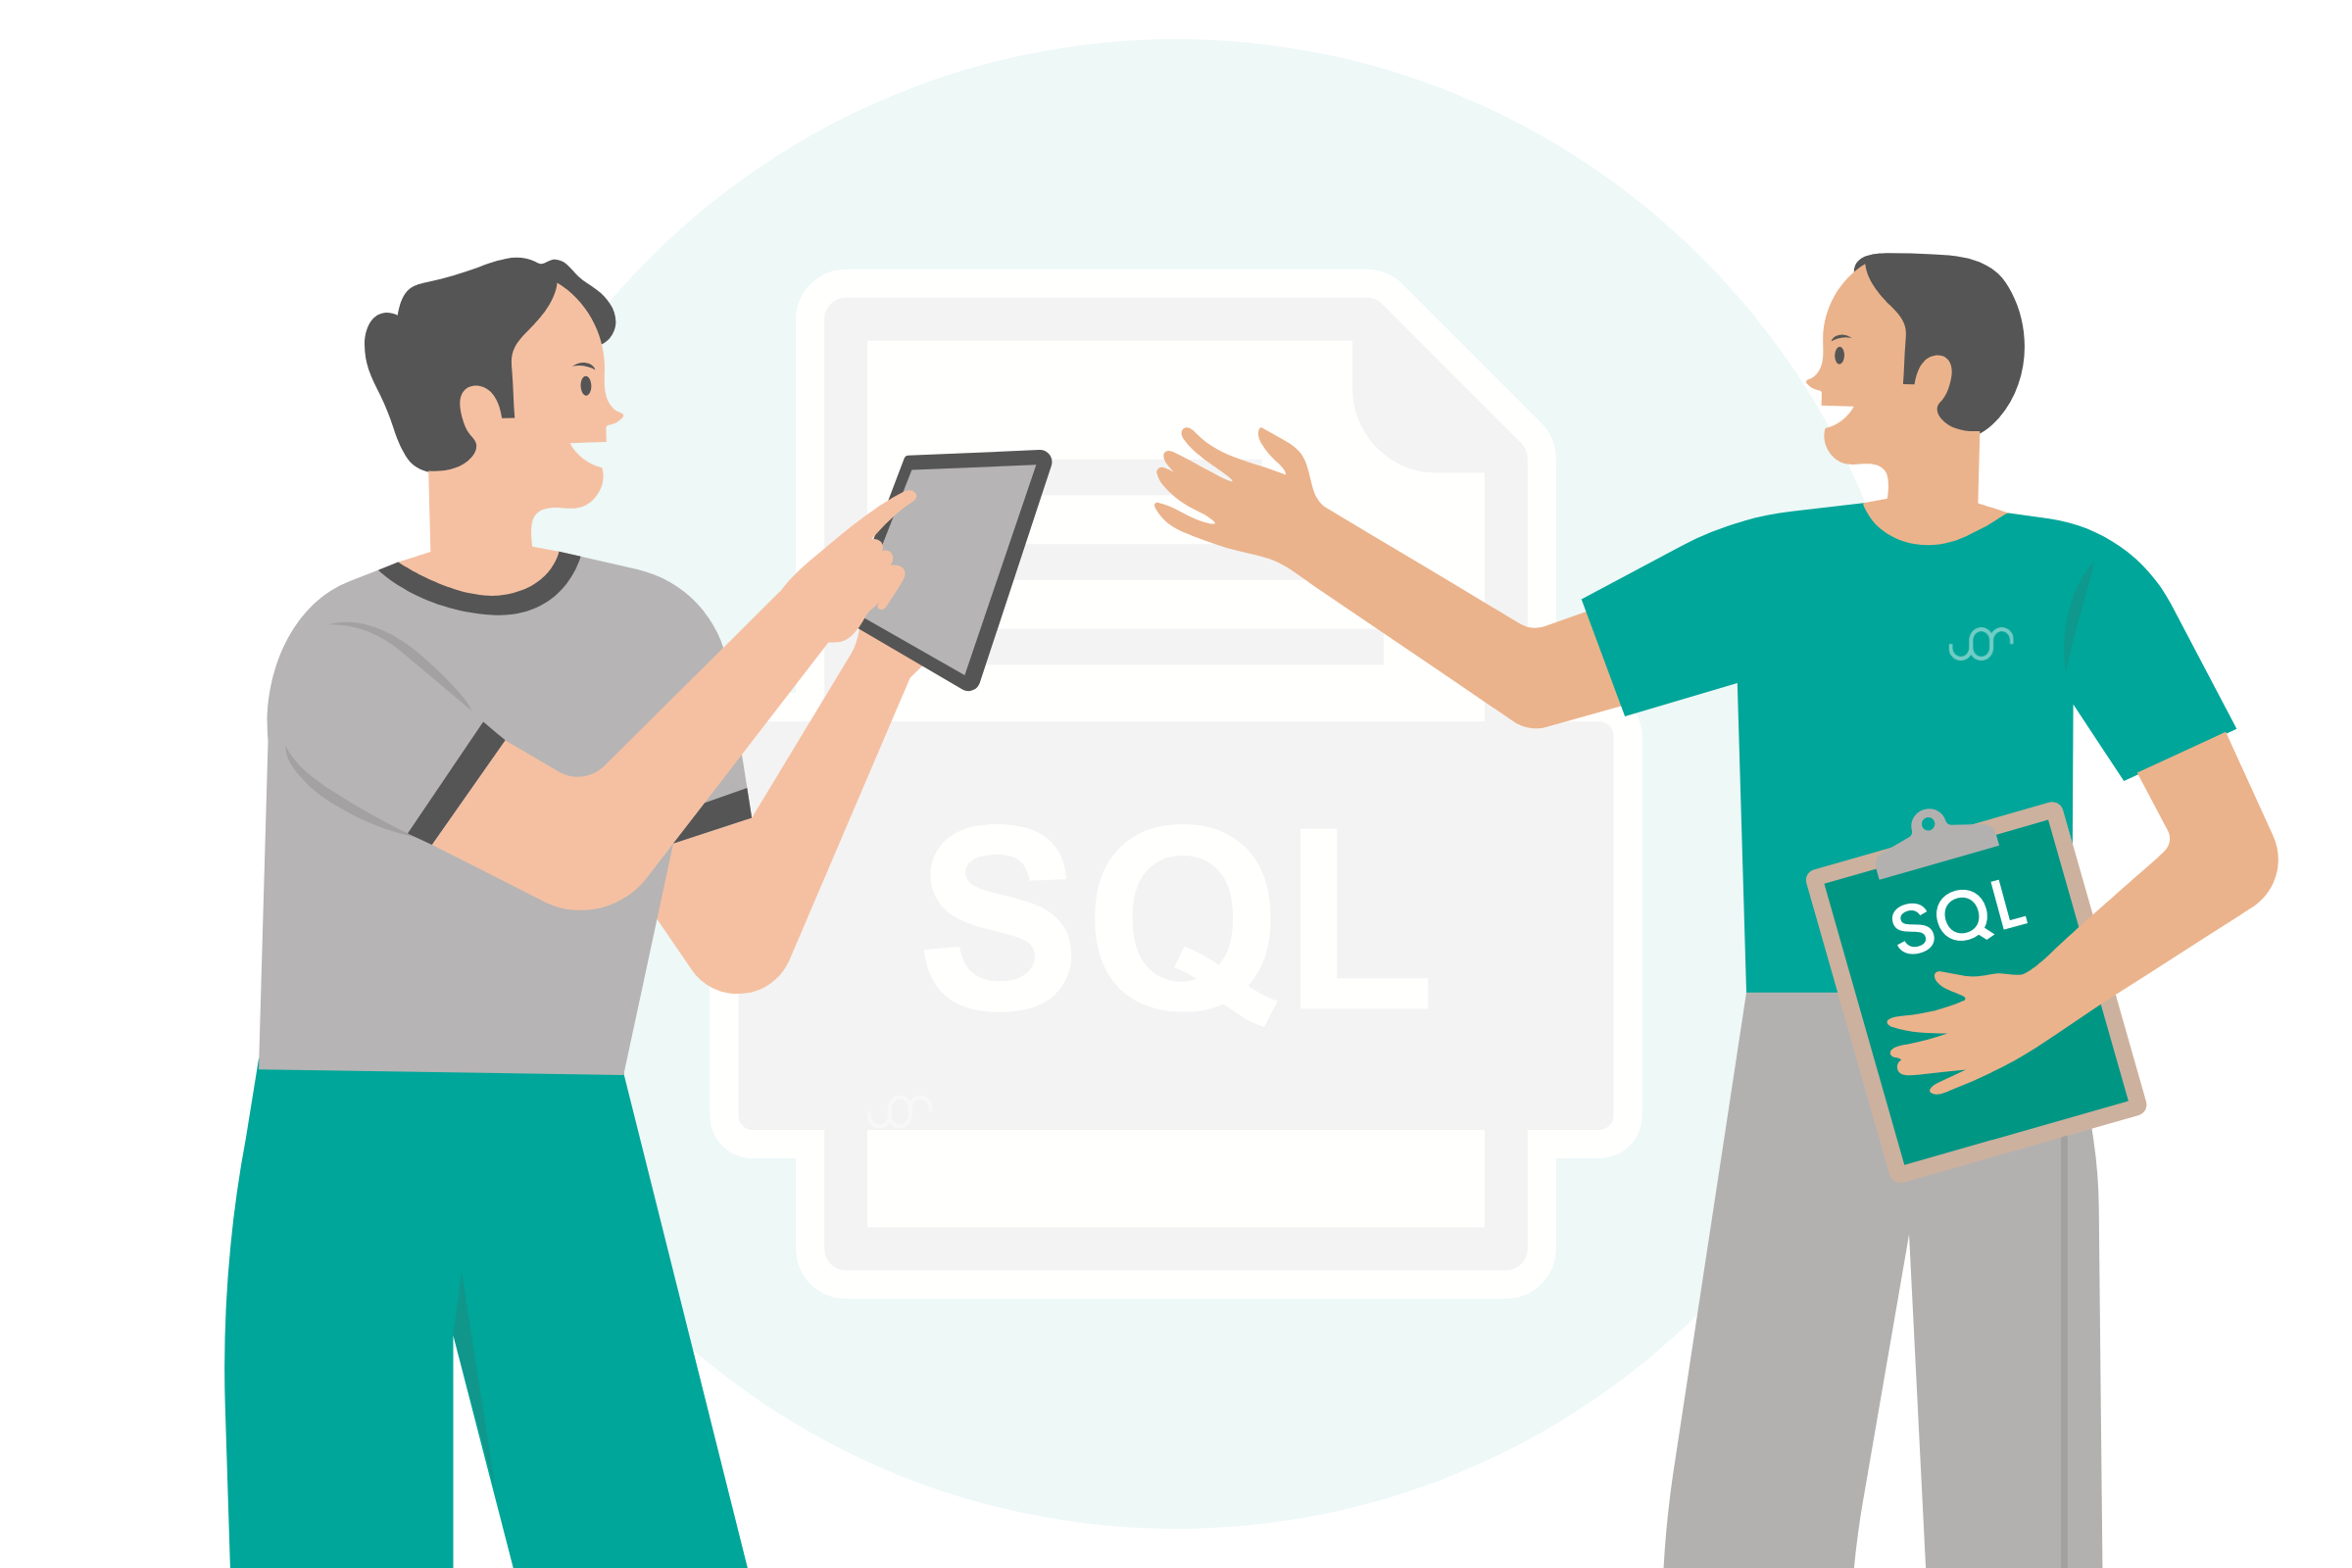 The Best Way to Learn SQL for Data Science